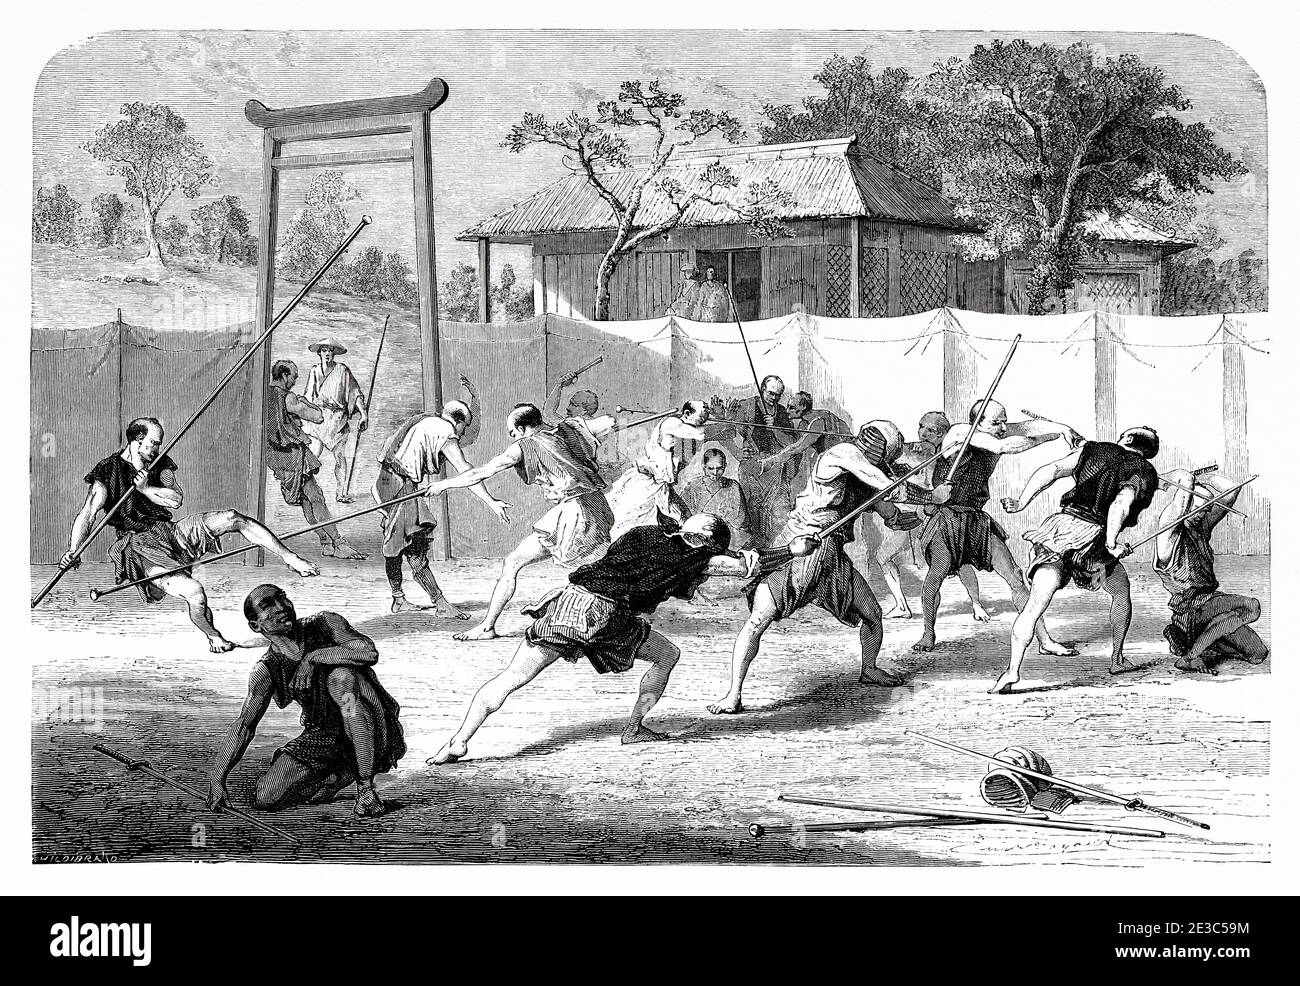 Fencing school, Japan. Old 19th century engraved illustration Travel to Japan by Aime Humbert  from El Mundo en La Mano 1879 Stock Photo